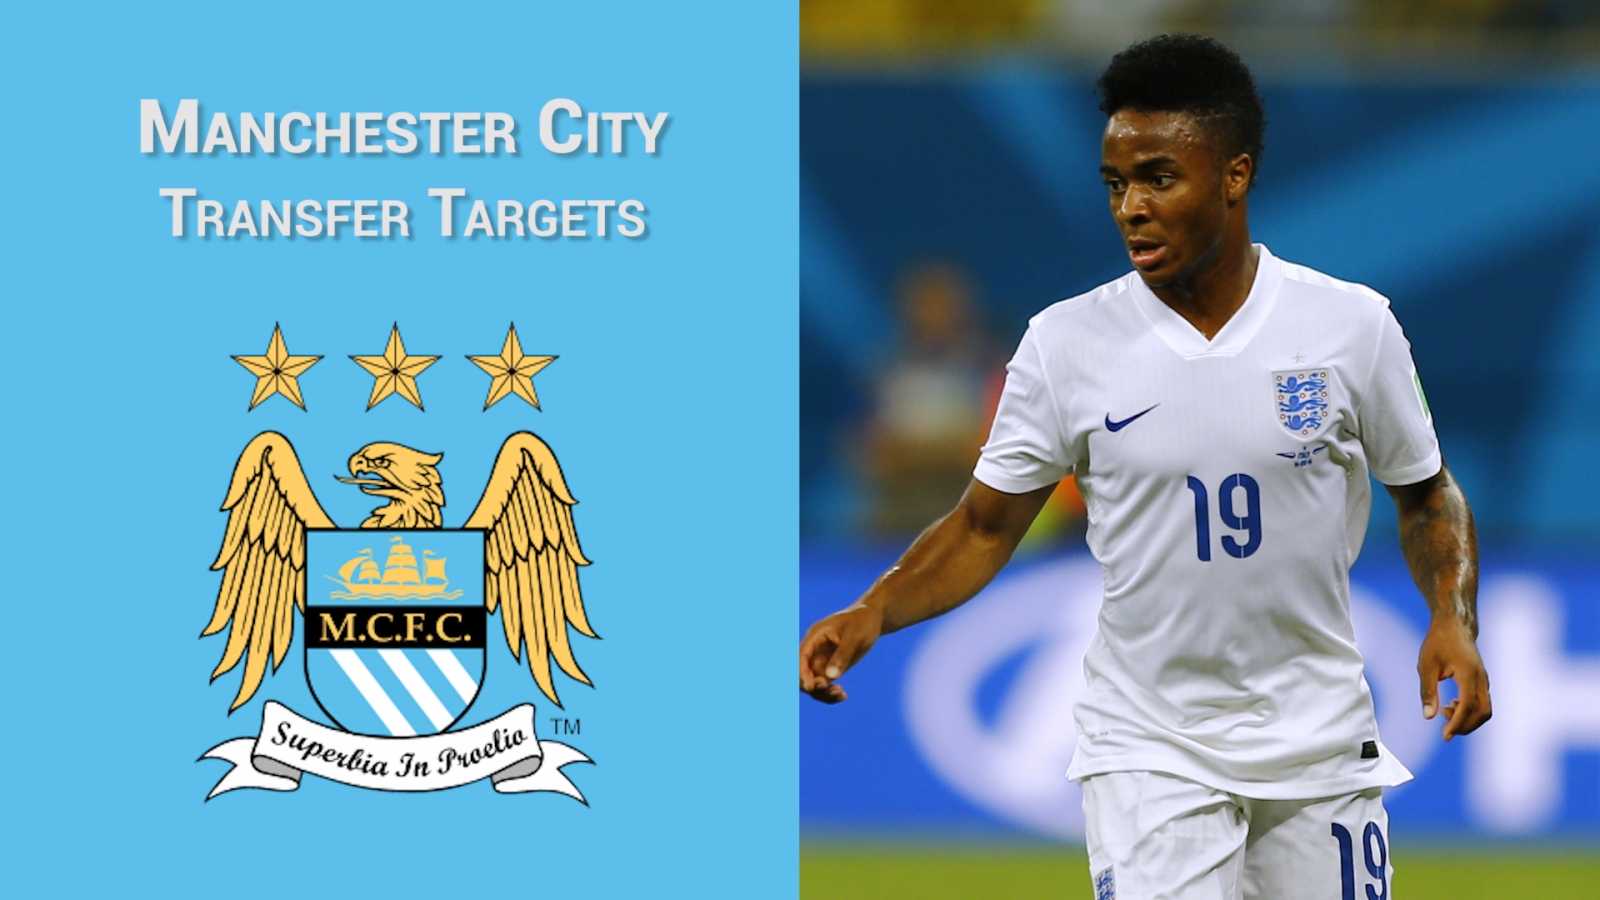 Manchester City transfer targets: Who are the club looking to sign this summer?